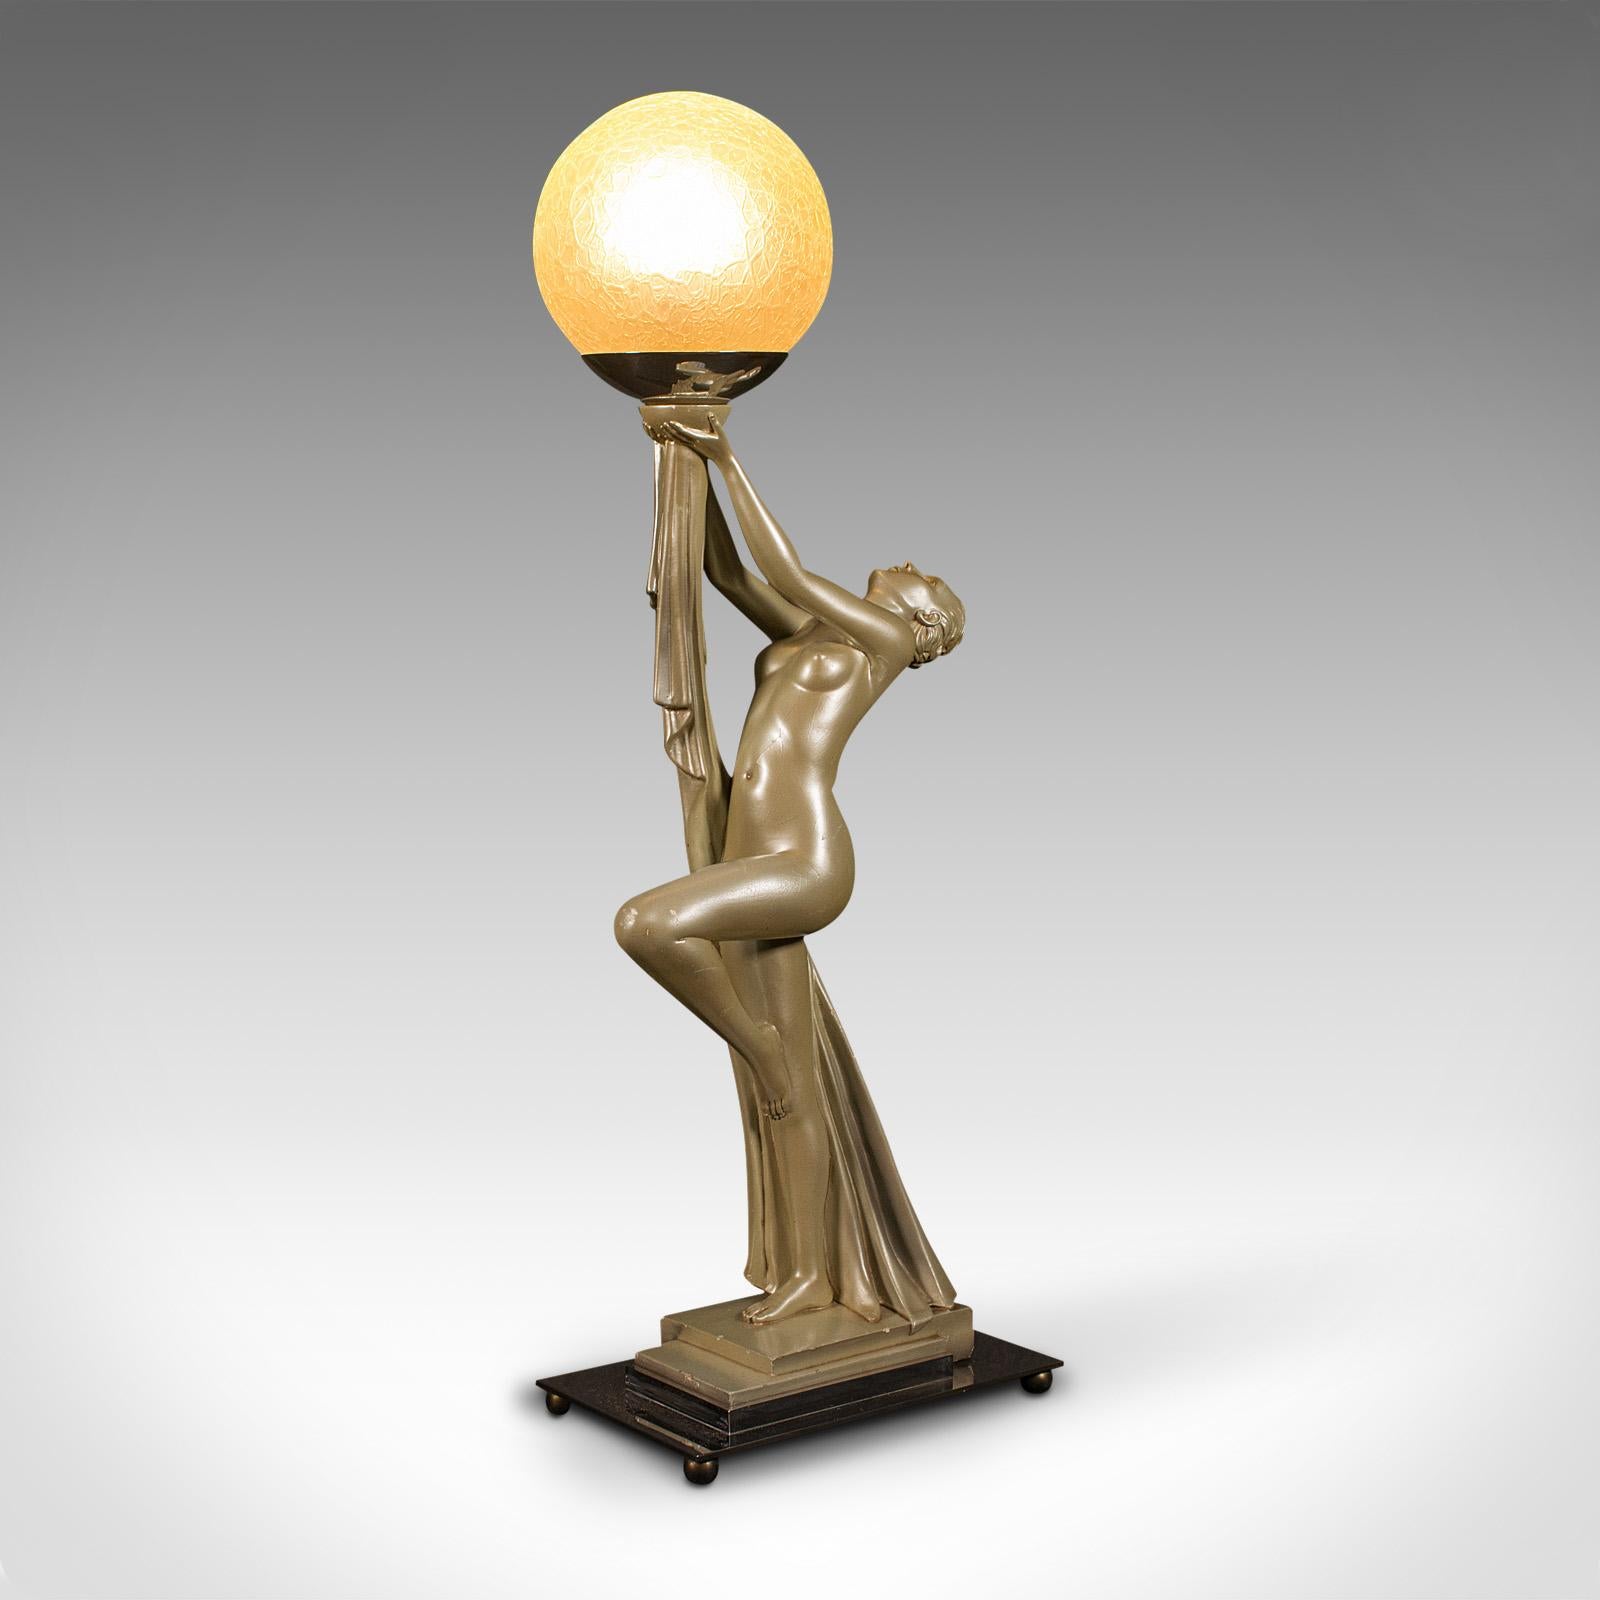 This is a vintage figural table lamp. An English, metallic plaster desk light in Art Deco taste by Leonardine, dating to the early 20th century, circa 1930.

Striking Art Deco lamp with the timeless nude female form
Displays a desirable aged